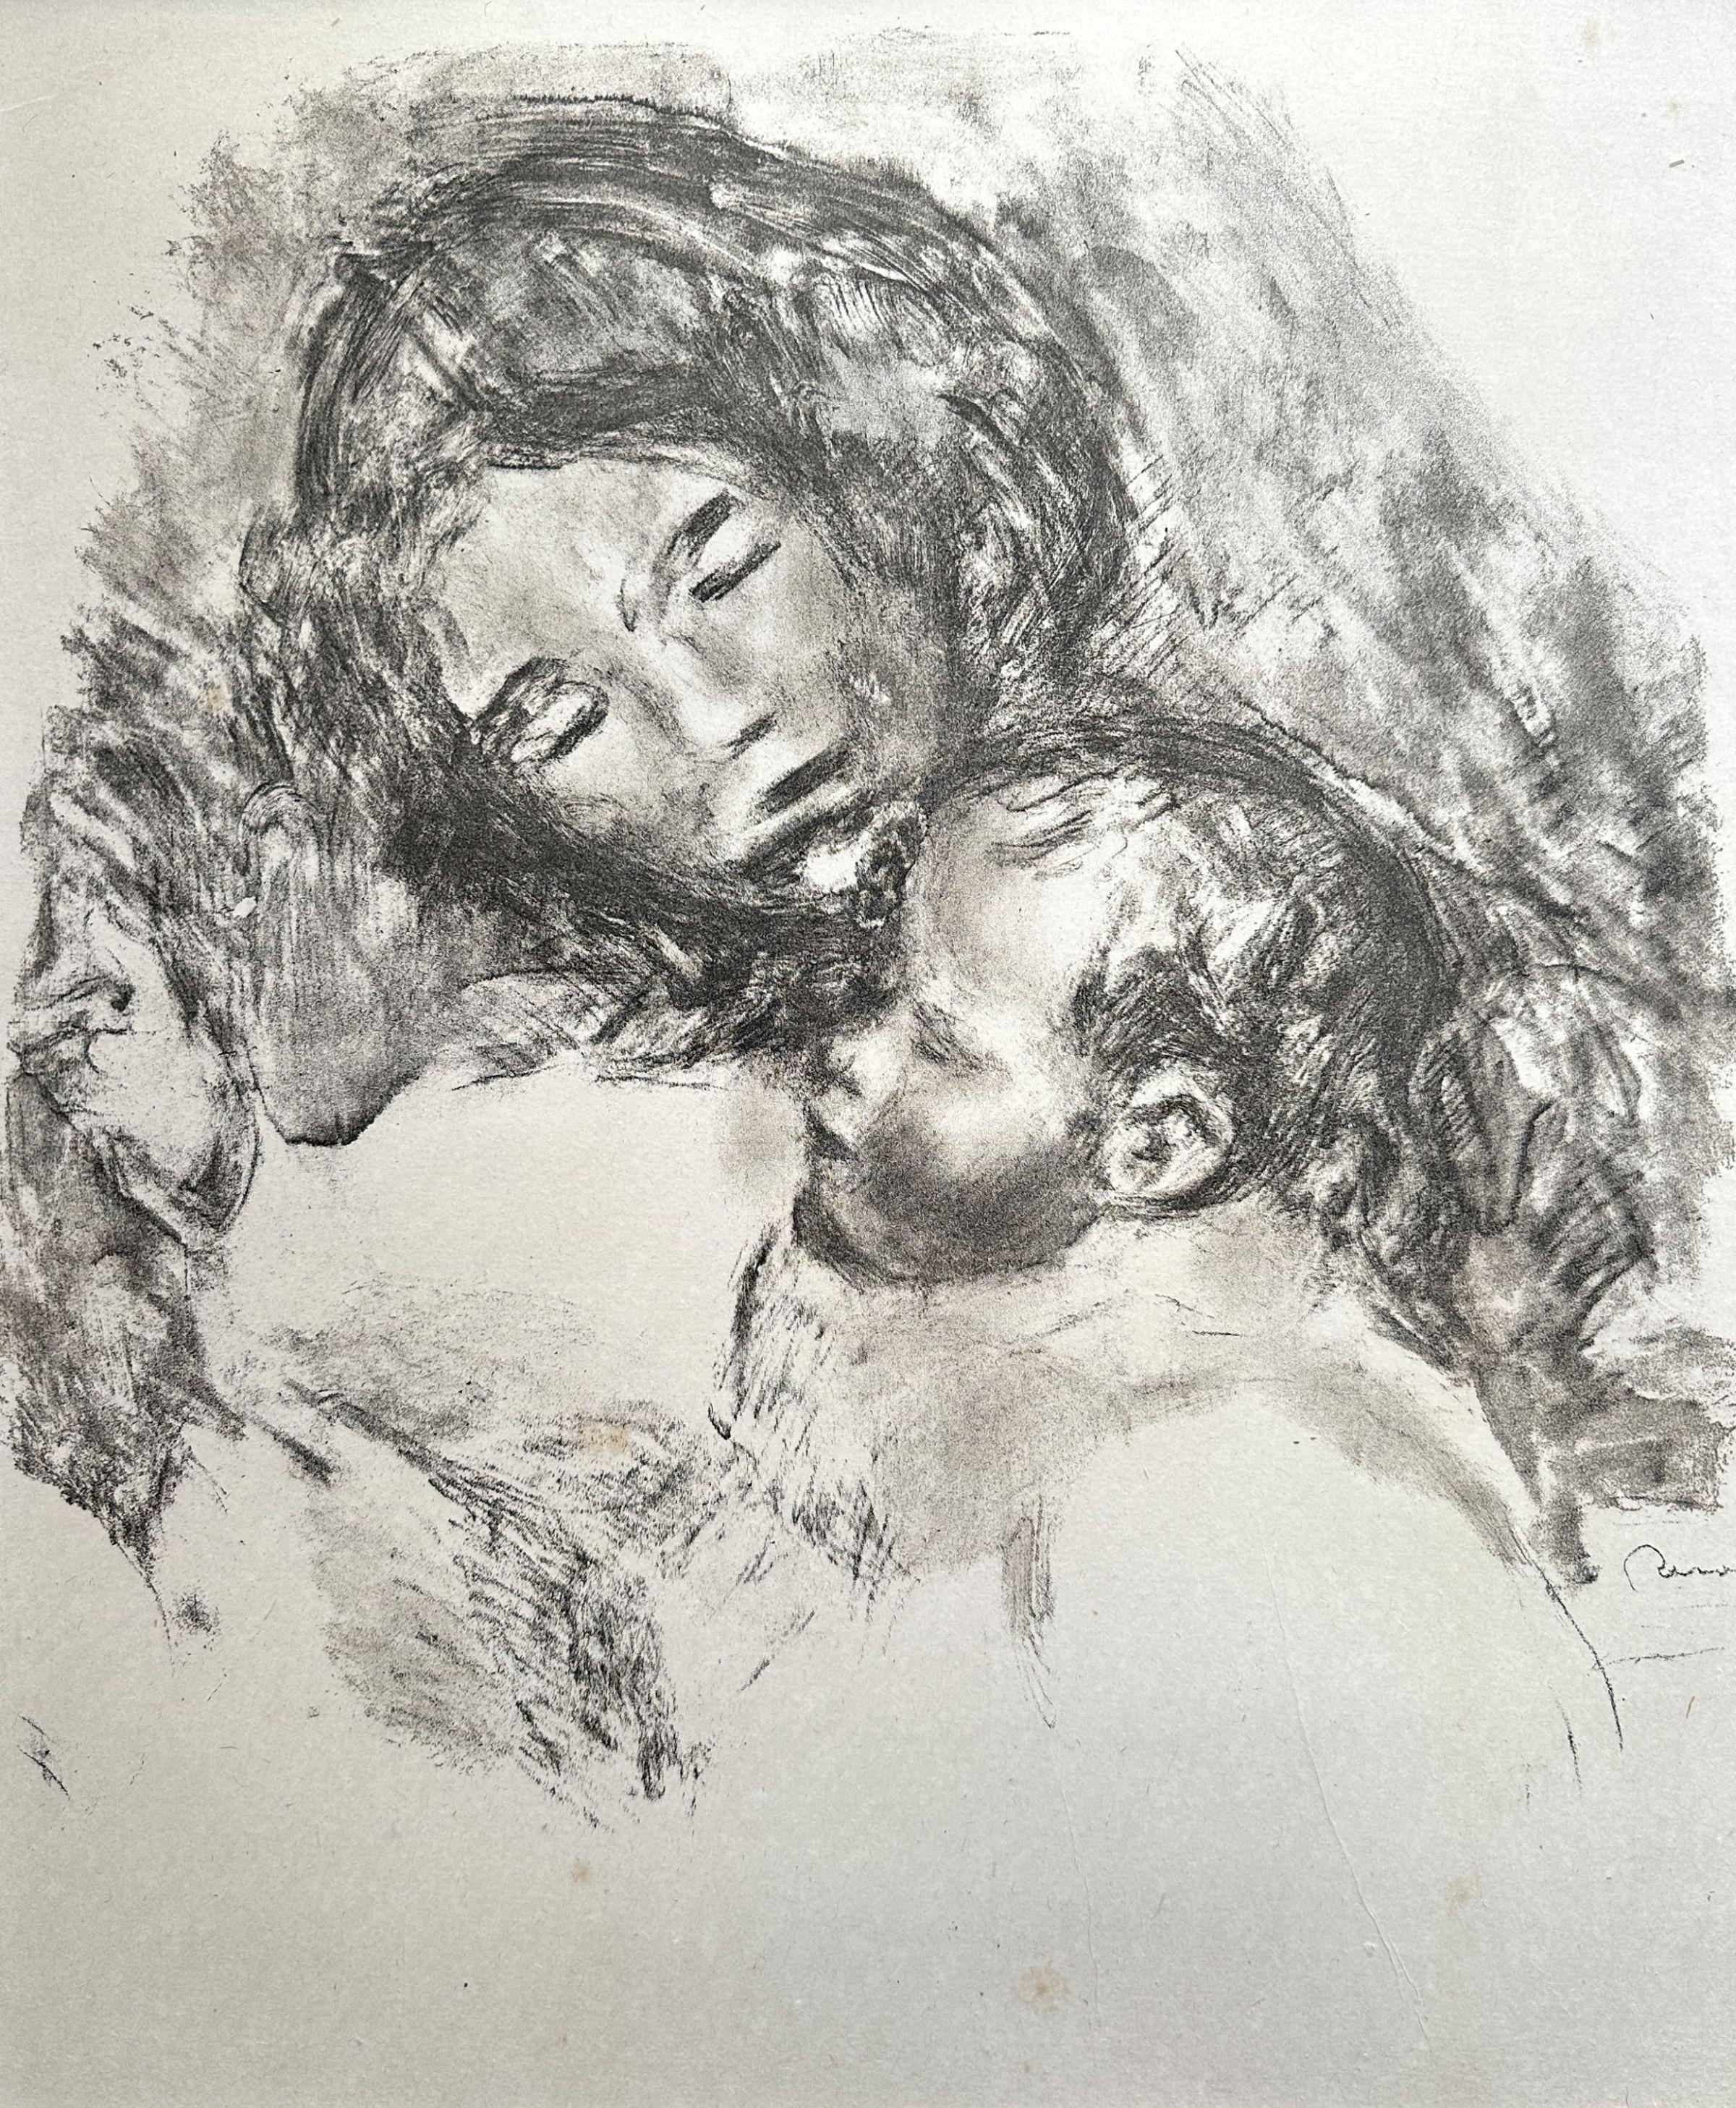 Maternity : Mom & His Child - Original Lithograph Signed Plate - Delteil 50 - Impressionist Print by Pierre Auguste Renoir